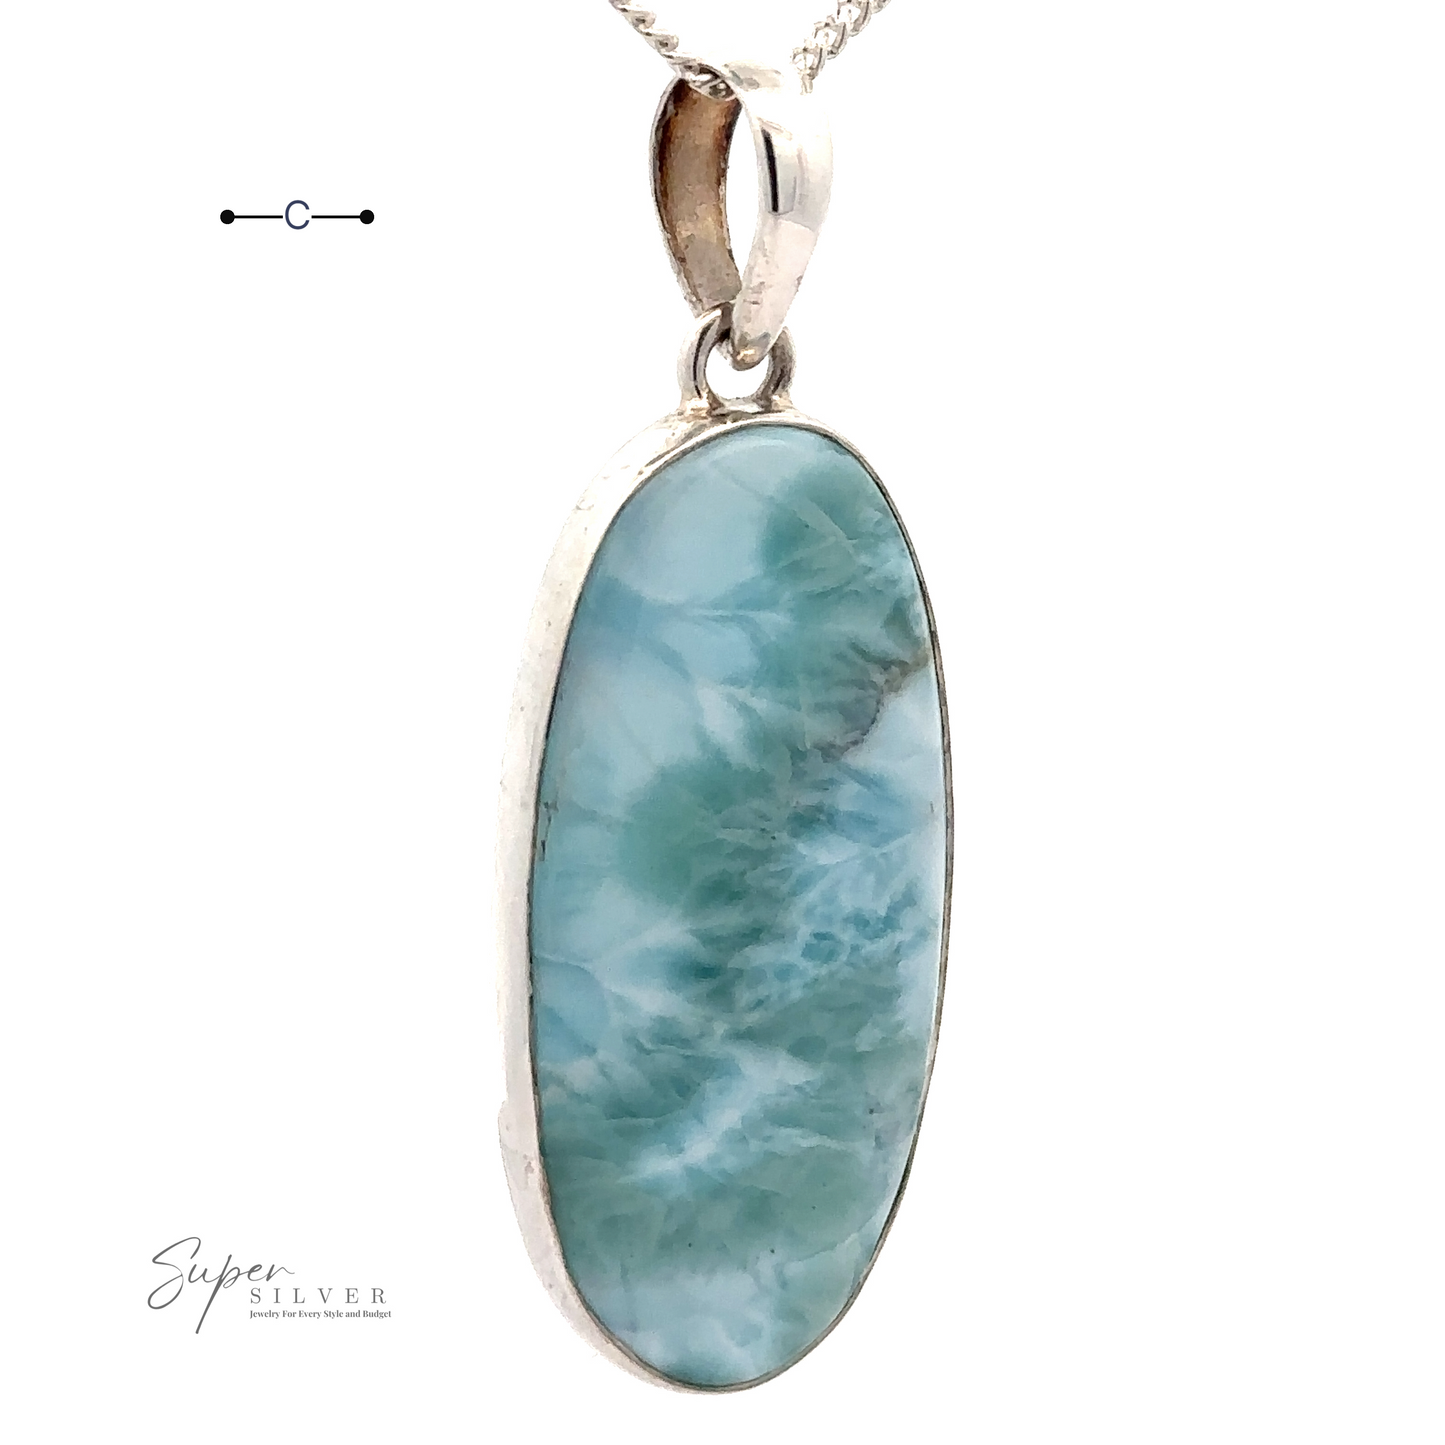 
                  
                    A Beautiful Long Oval Larimar Pendant, crafted from .925 Sterling Silver, showcases an oval-shaped blue-green Larimar gemstone sourced from the Dominican Republic, hanging on a delicate chain.
                  
                